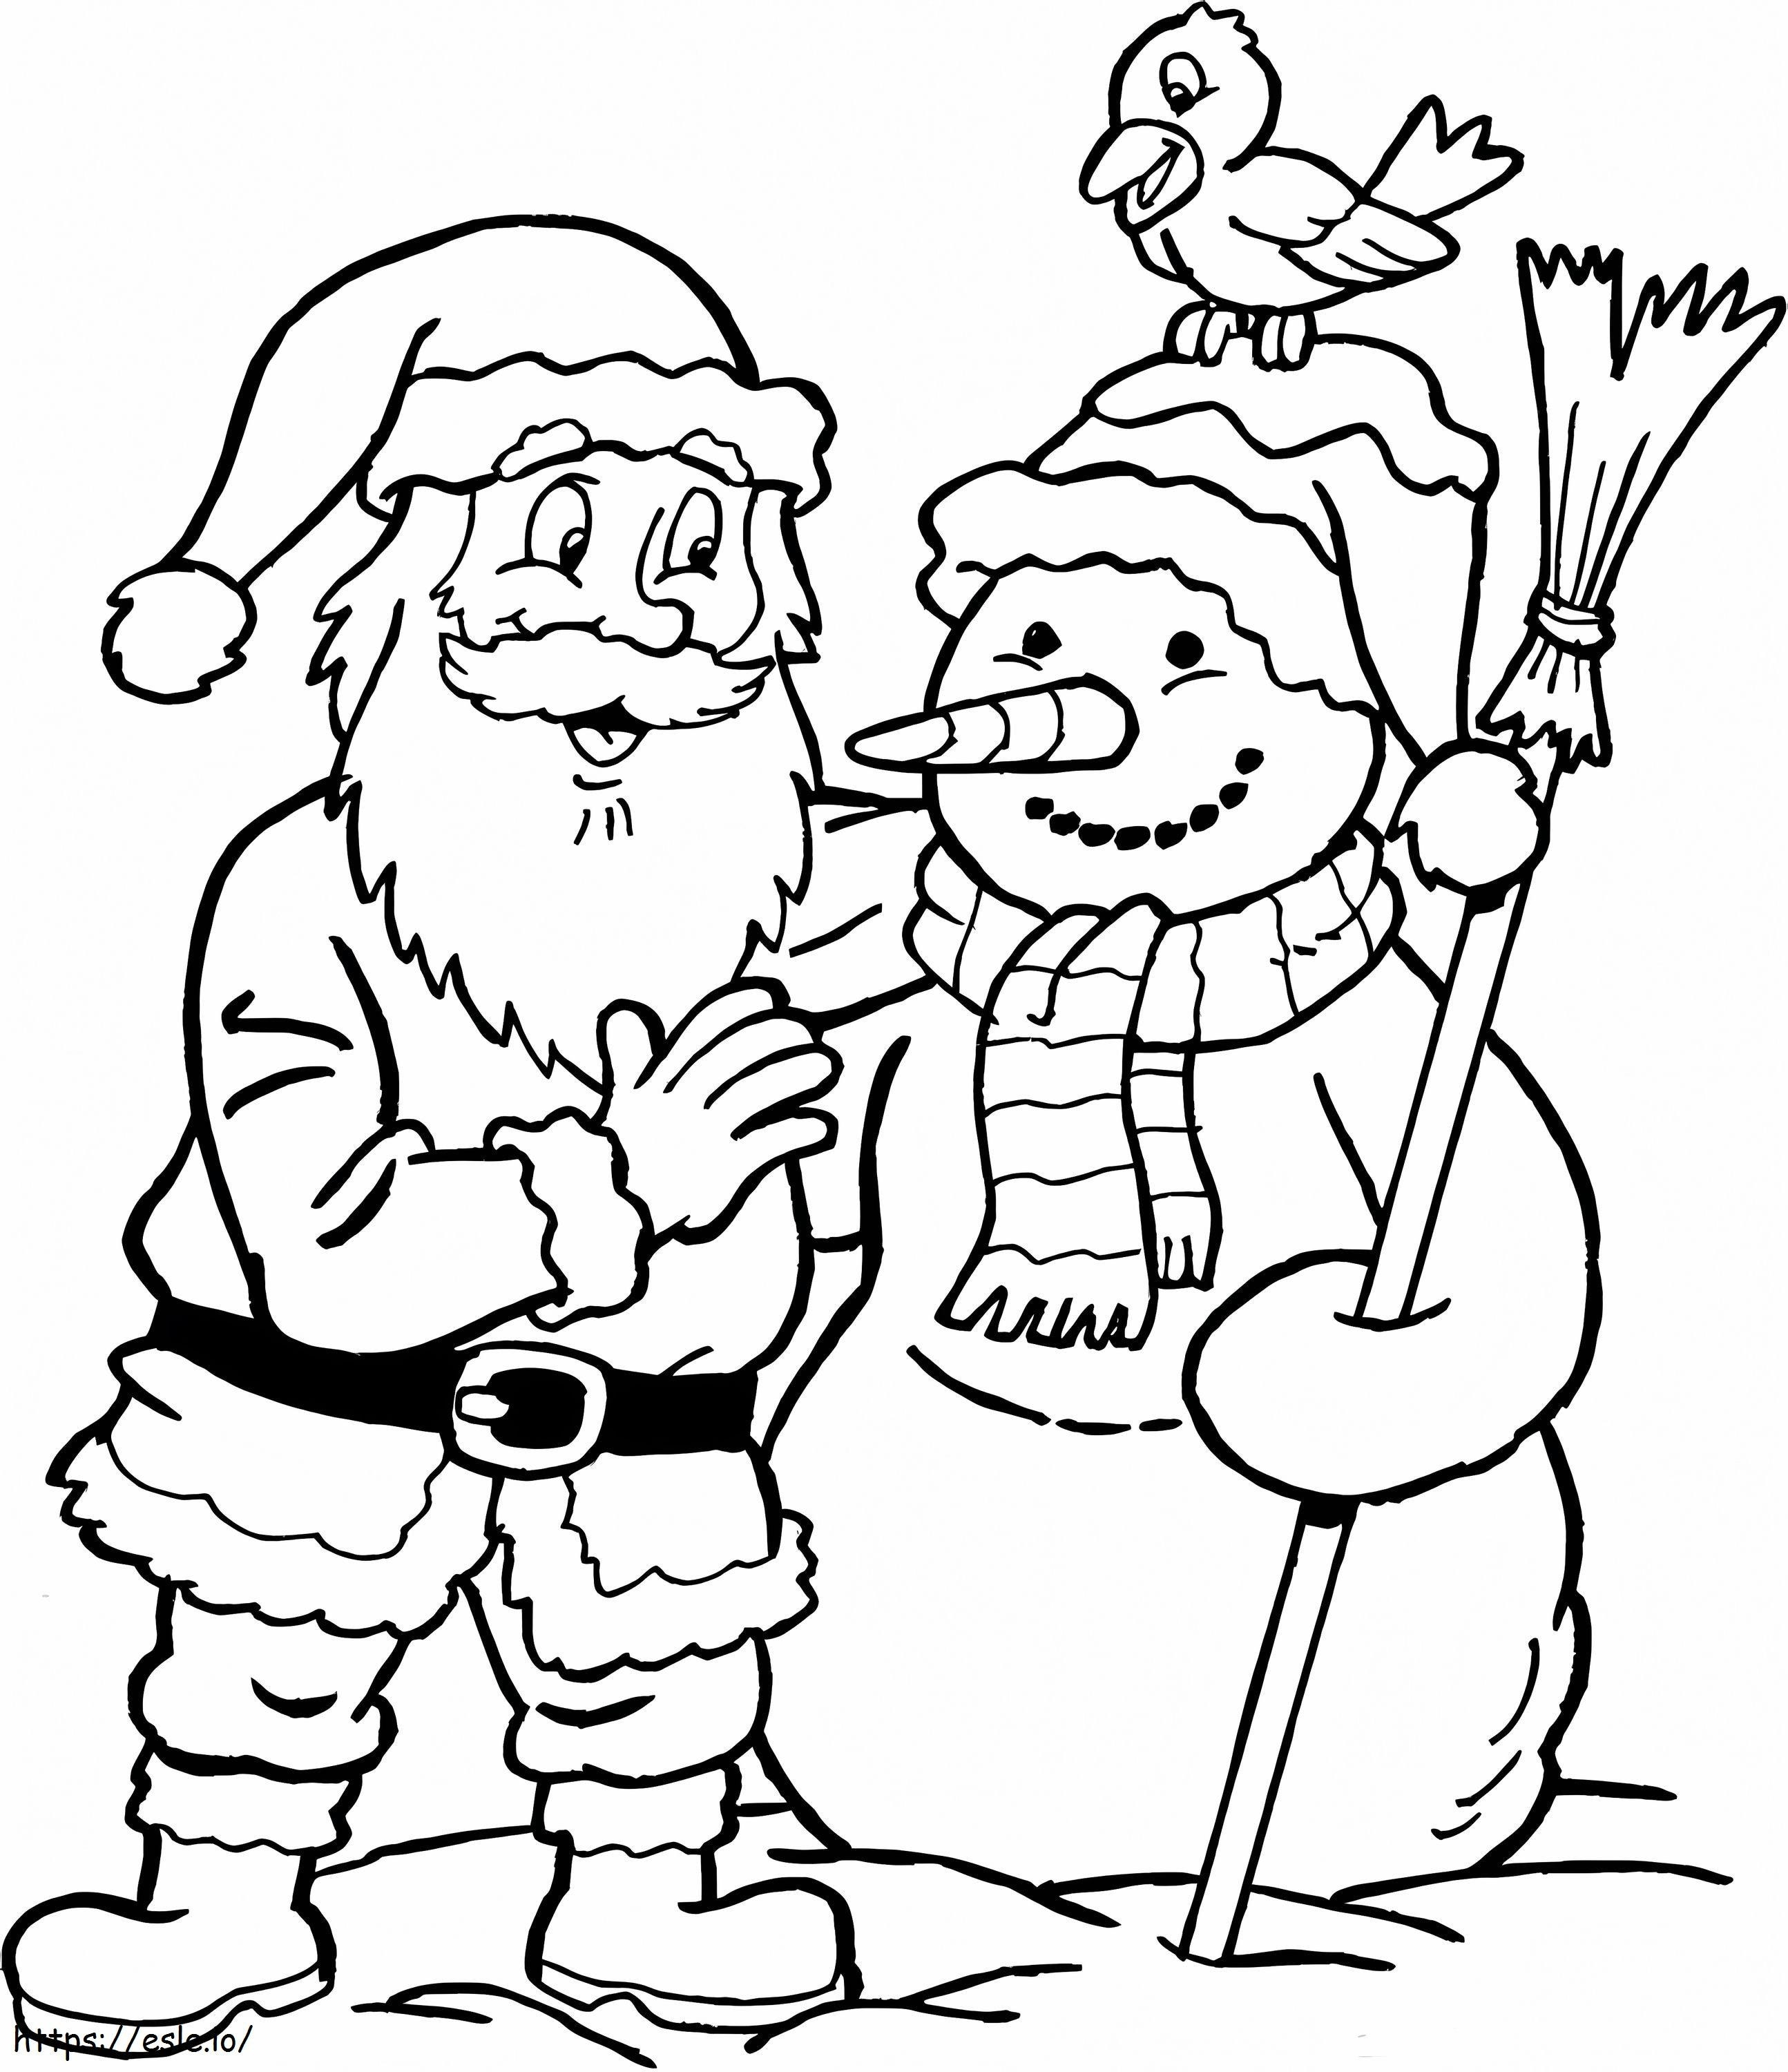 Santa Claus With Snowman 2 coloring page